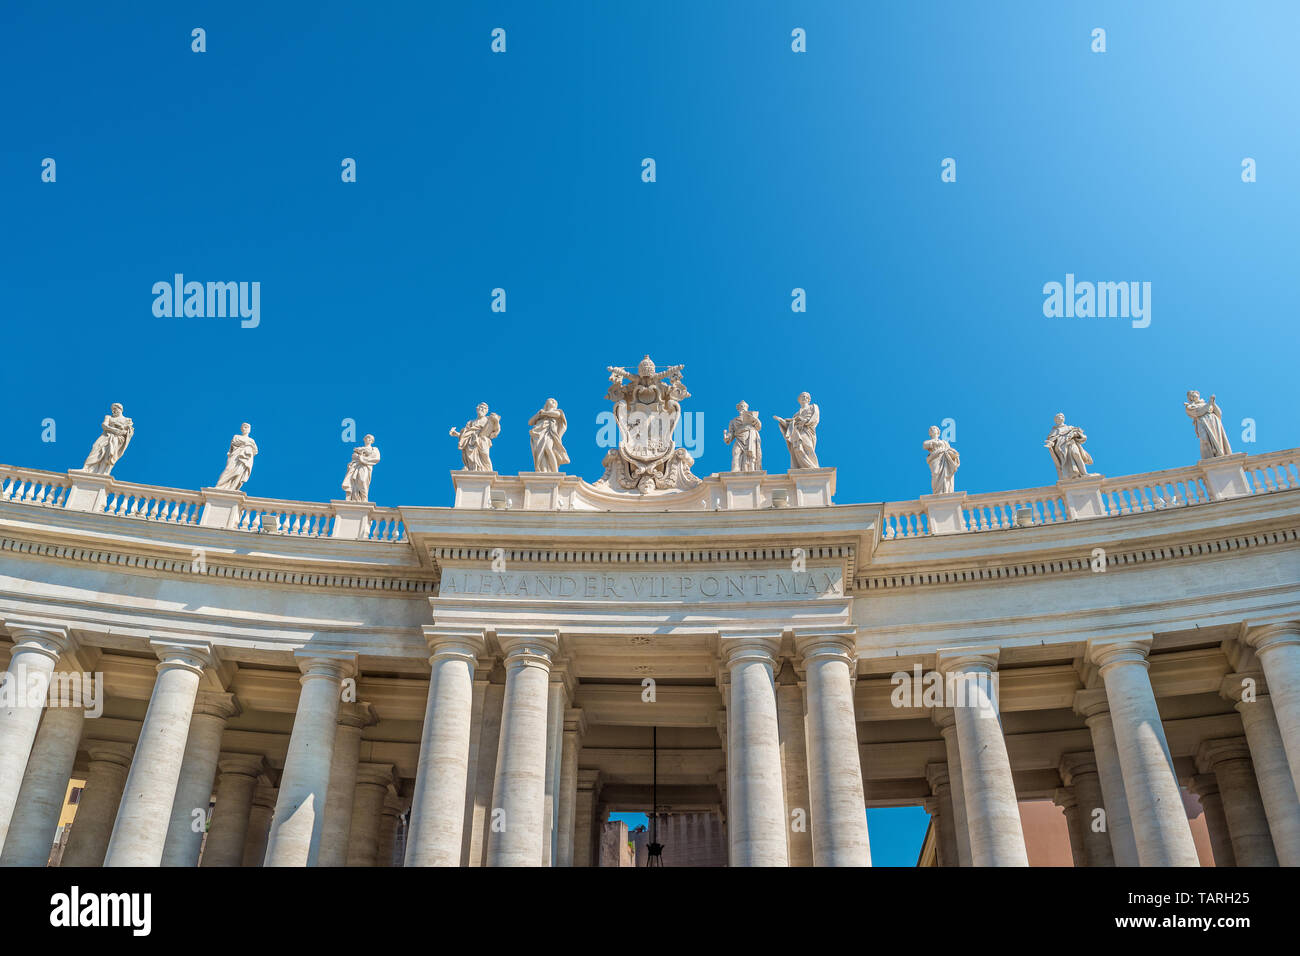 Doric Columns of St. Peter's Square in the Vatican Stock Photo